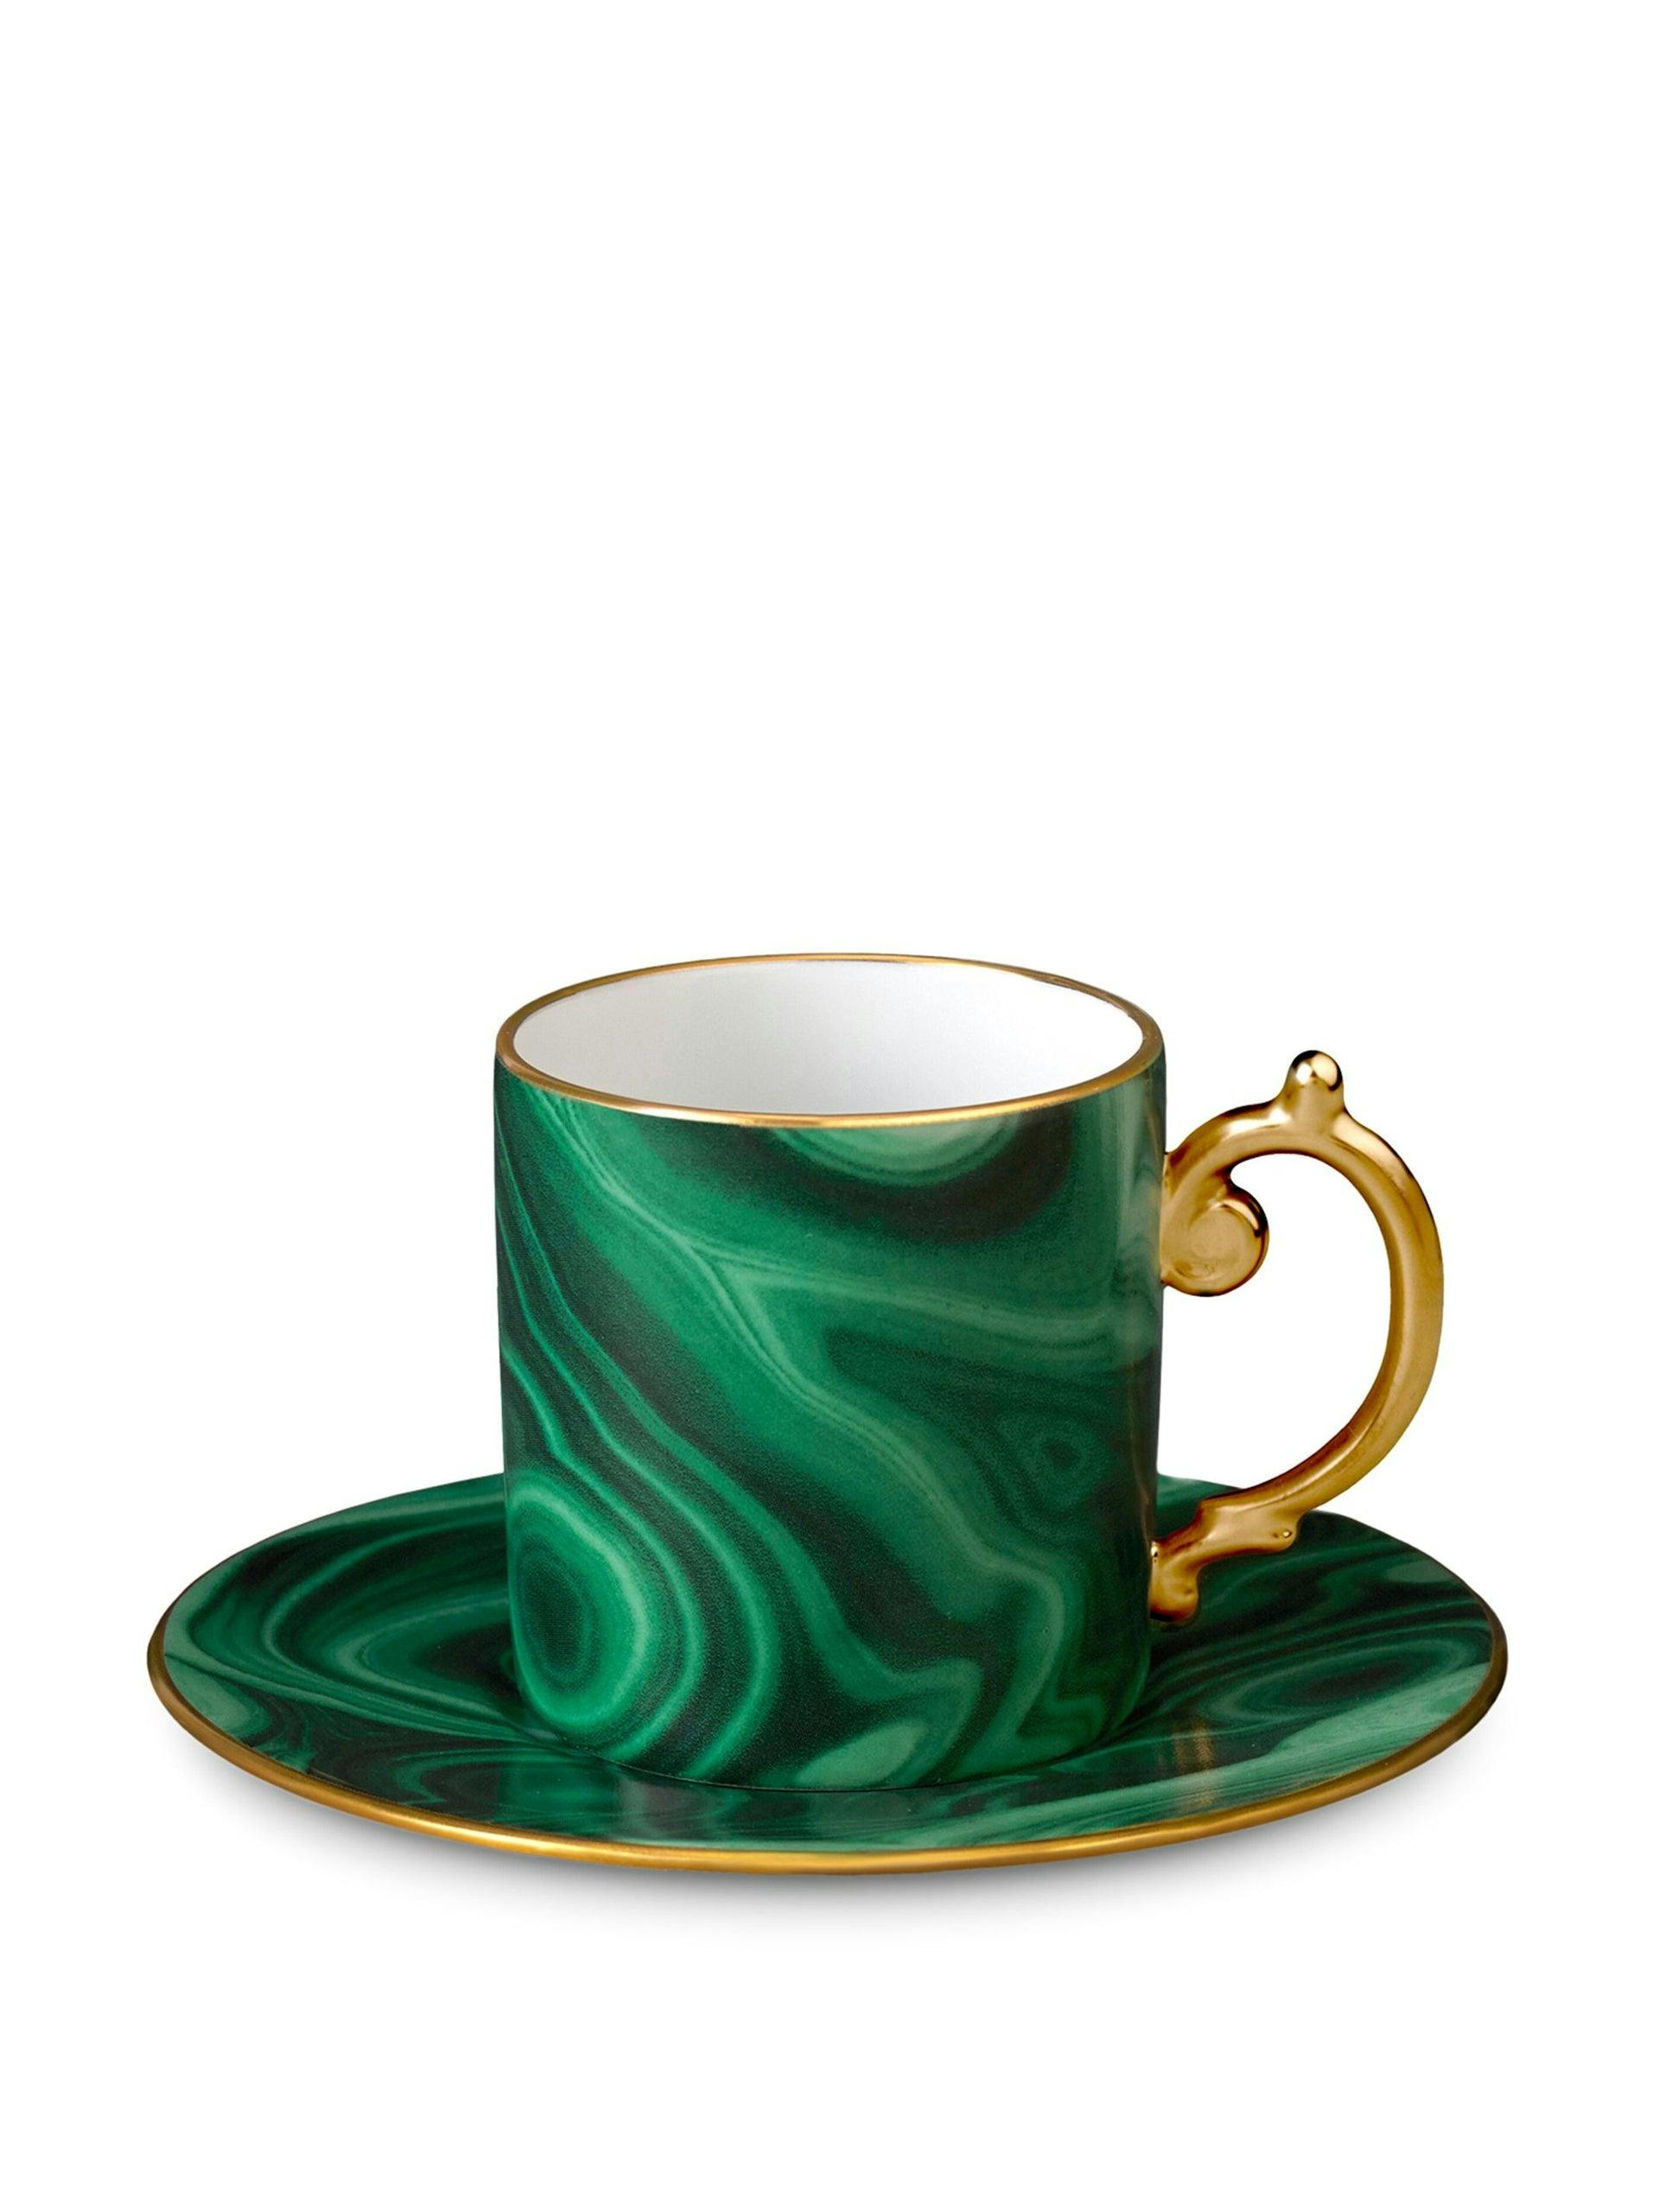 Malachite espresso cup and saucer with gold-plated details